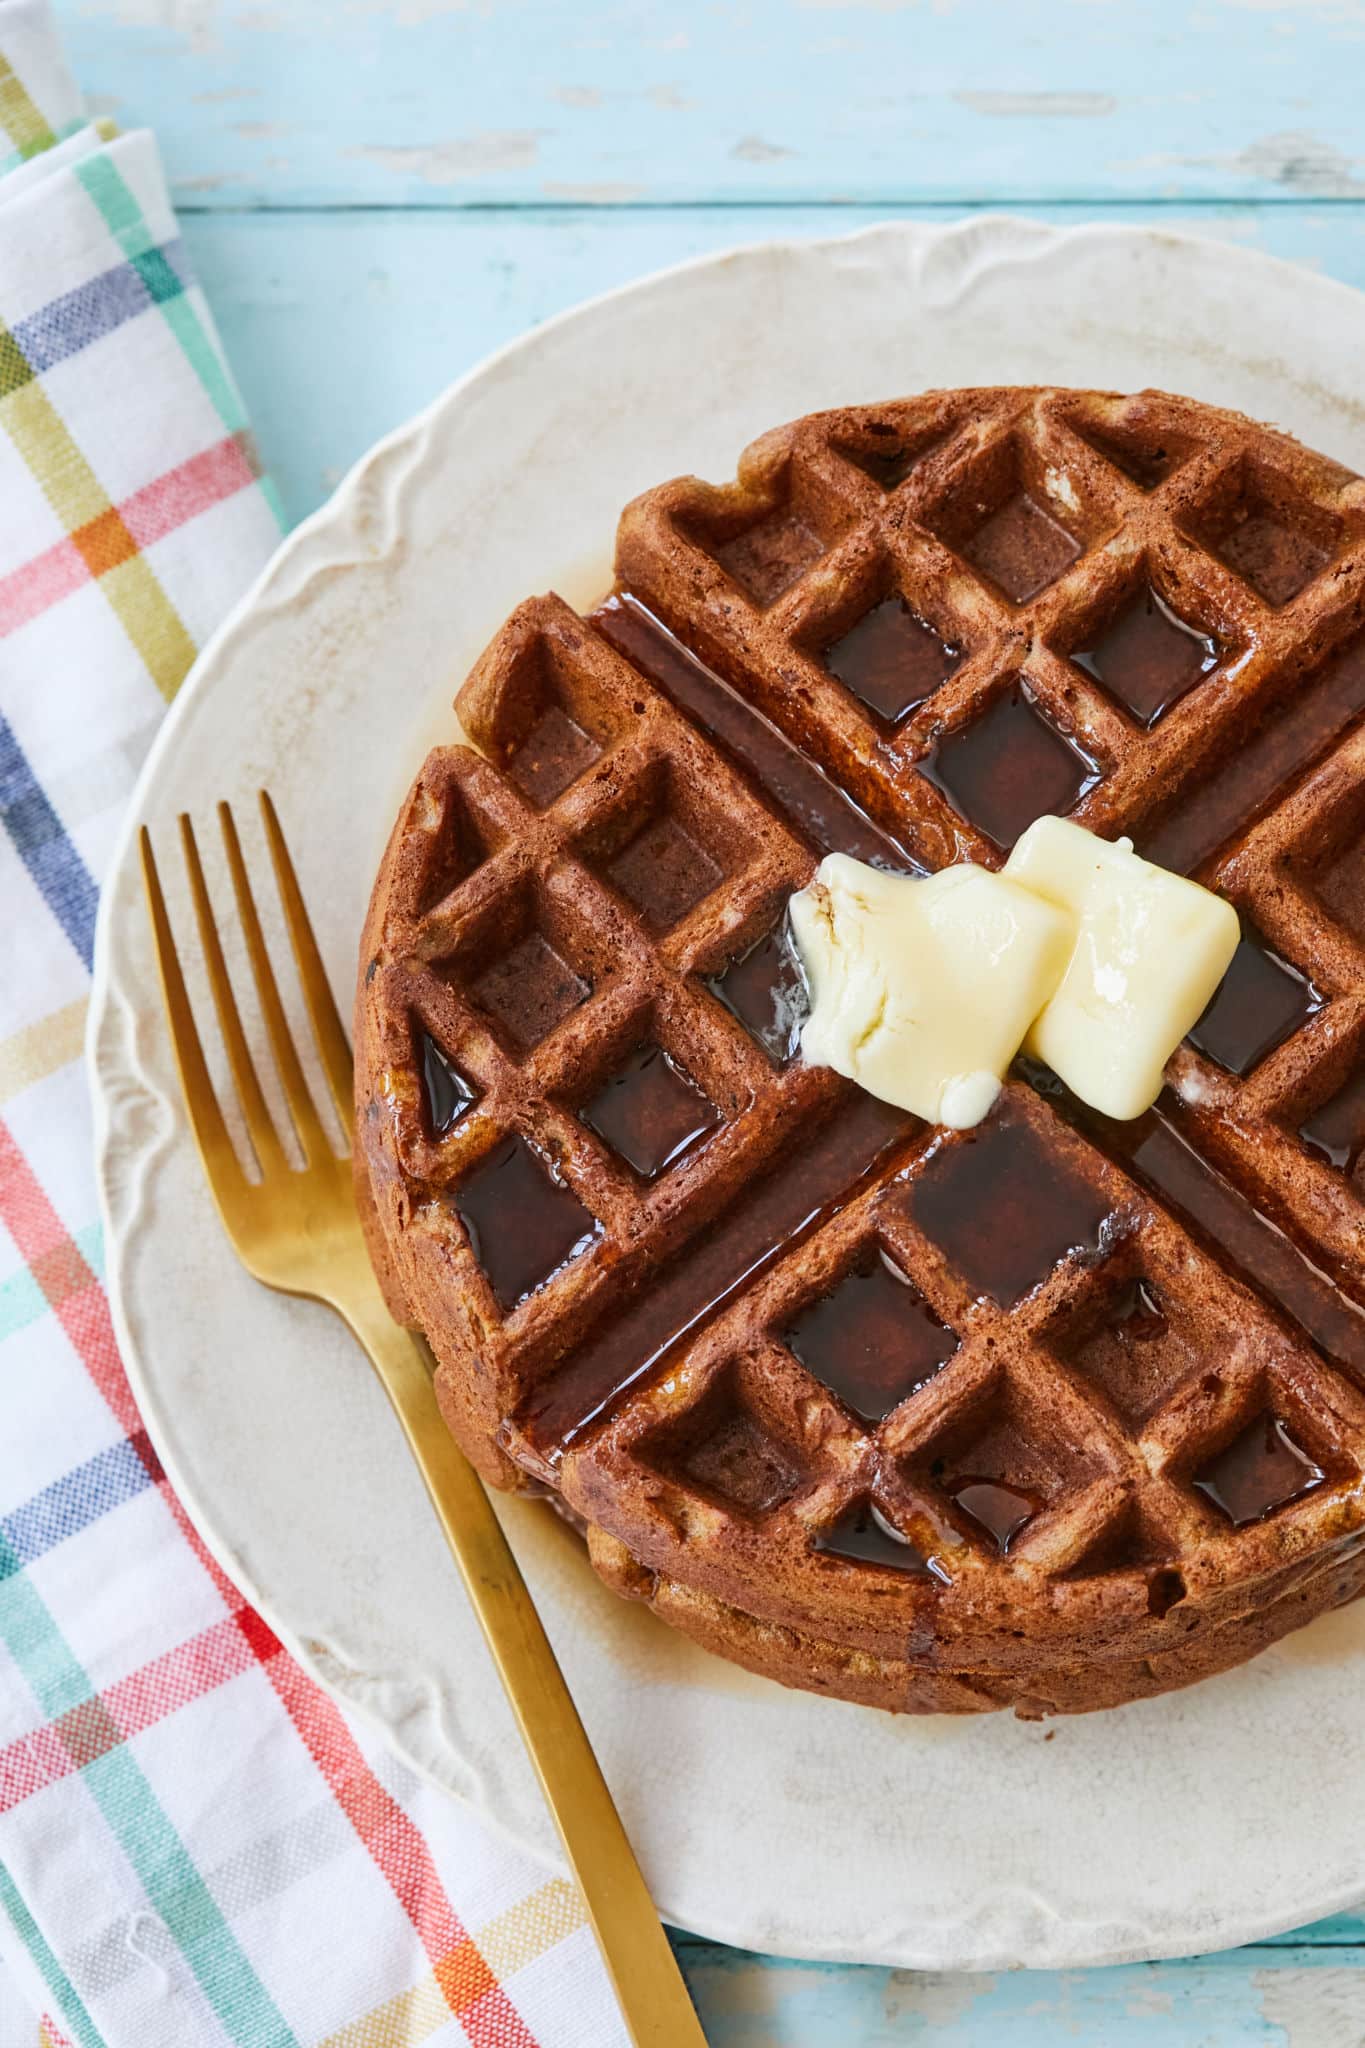 A plate with gingerbread waffles on it, to show texture.